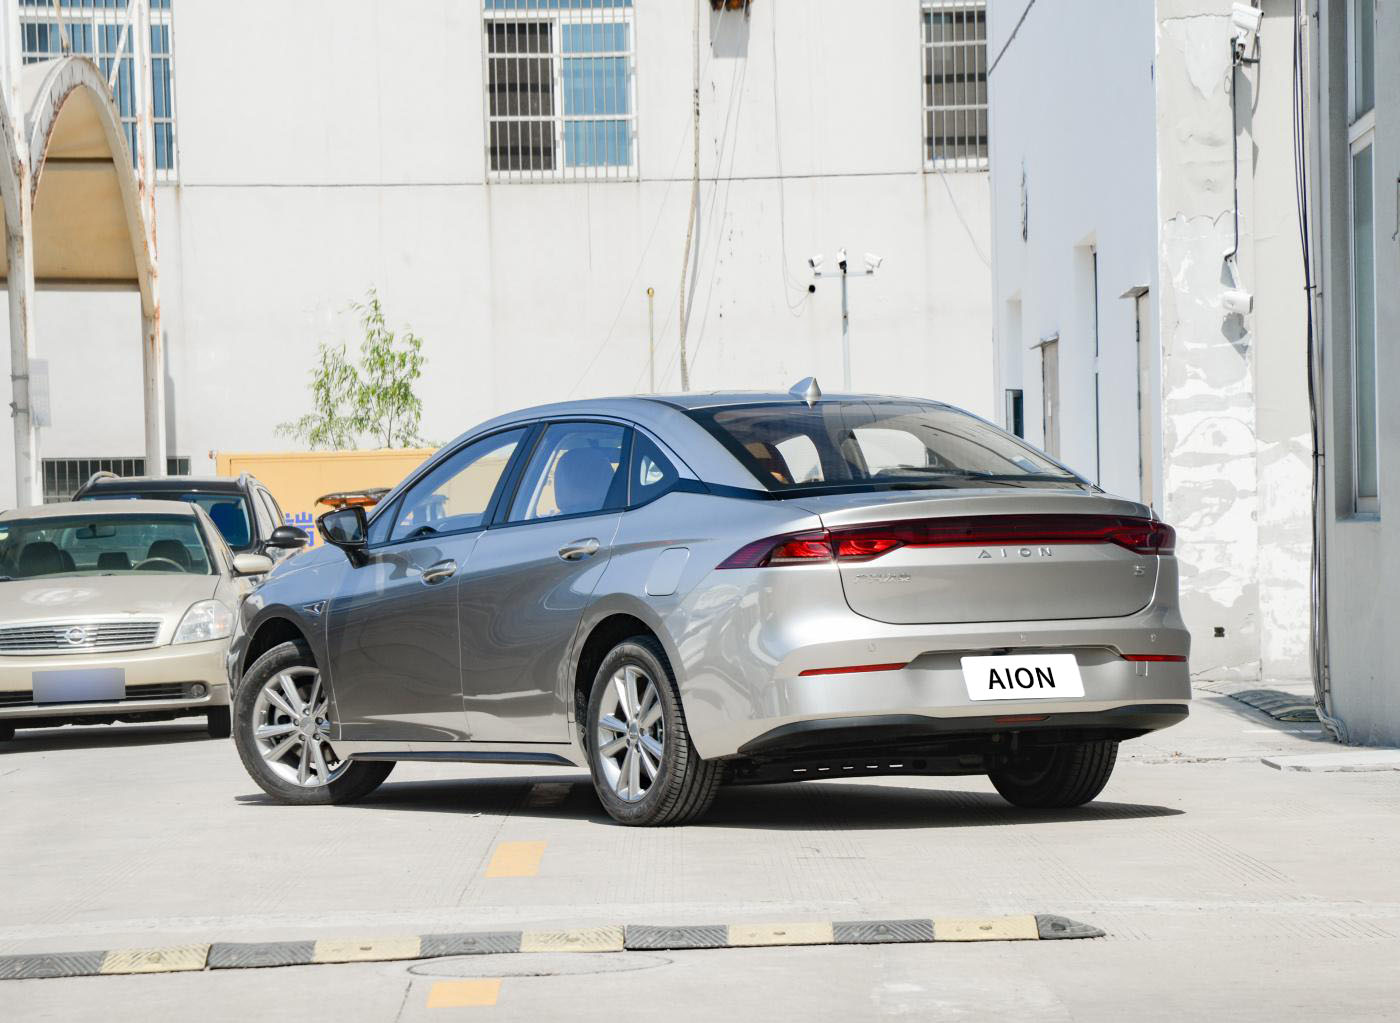 GAC AION New Energy Vehicle, AION S Mei 580 Electric Sedan To Export Trade - AION - 4